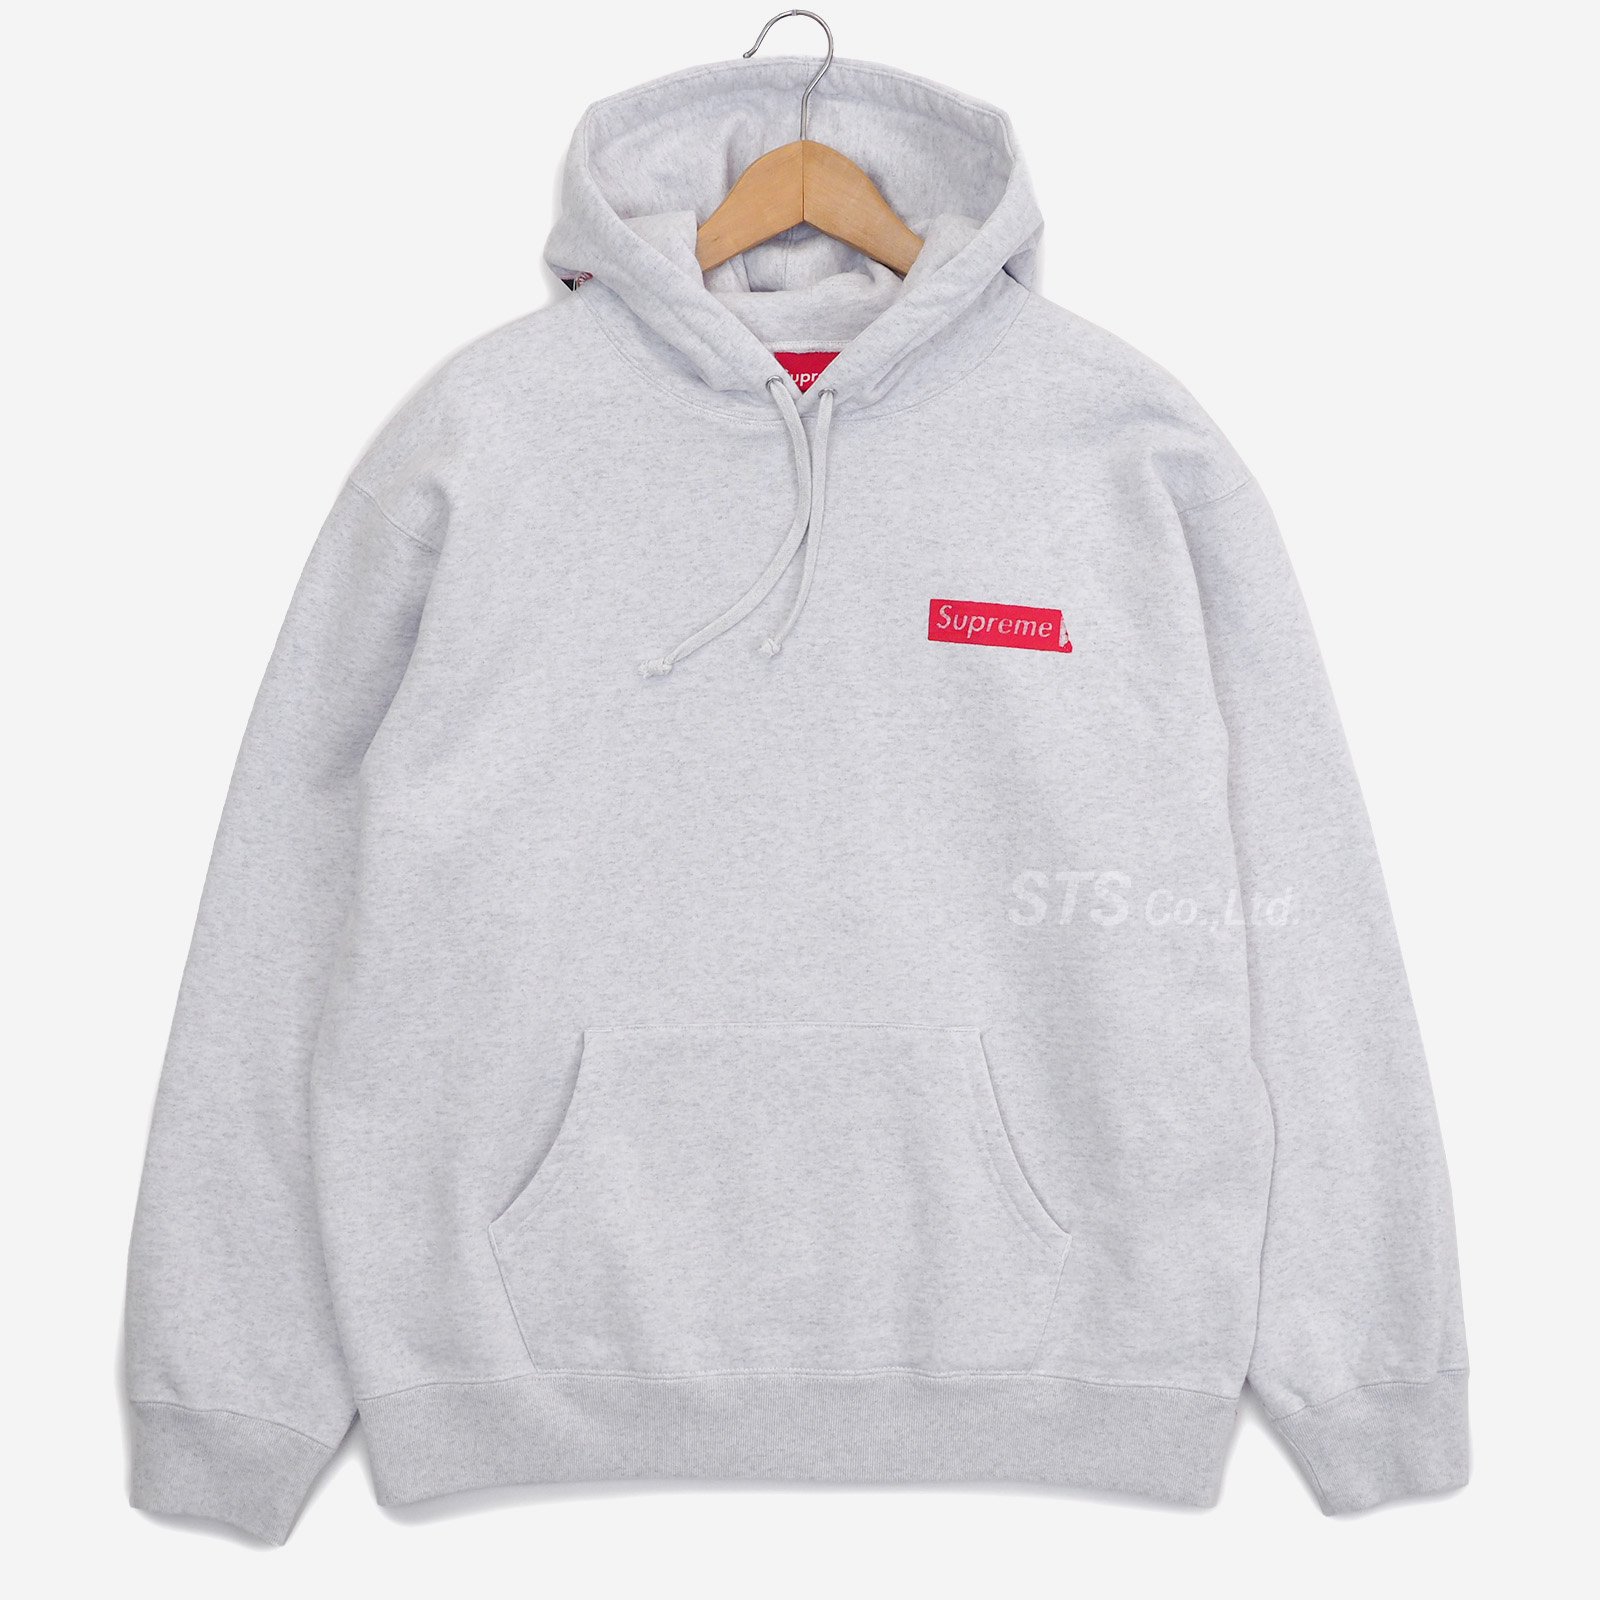 Supreme Instant High Patches Hooded ＸＬ | www.fleettracktz.com